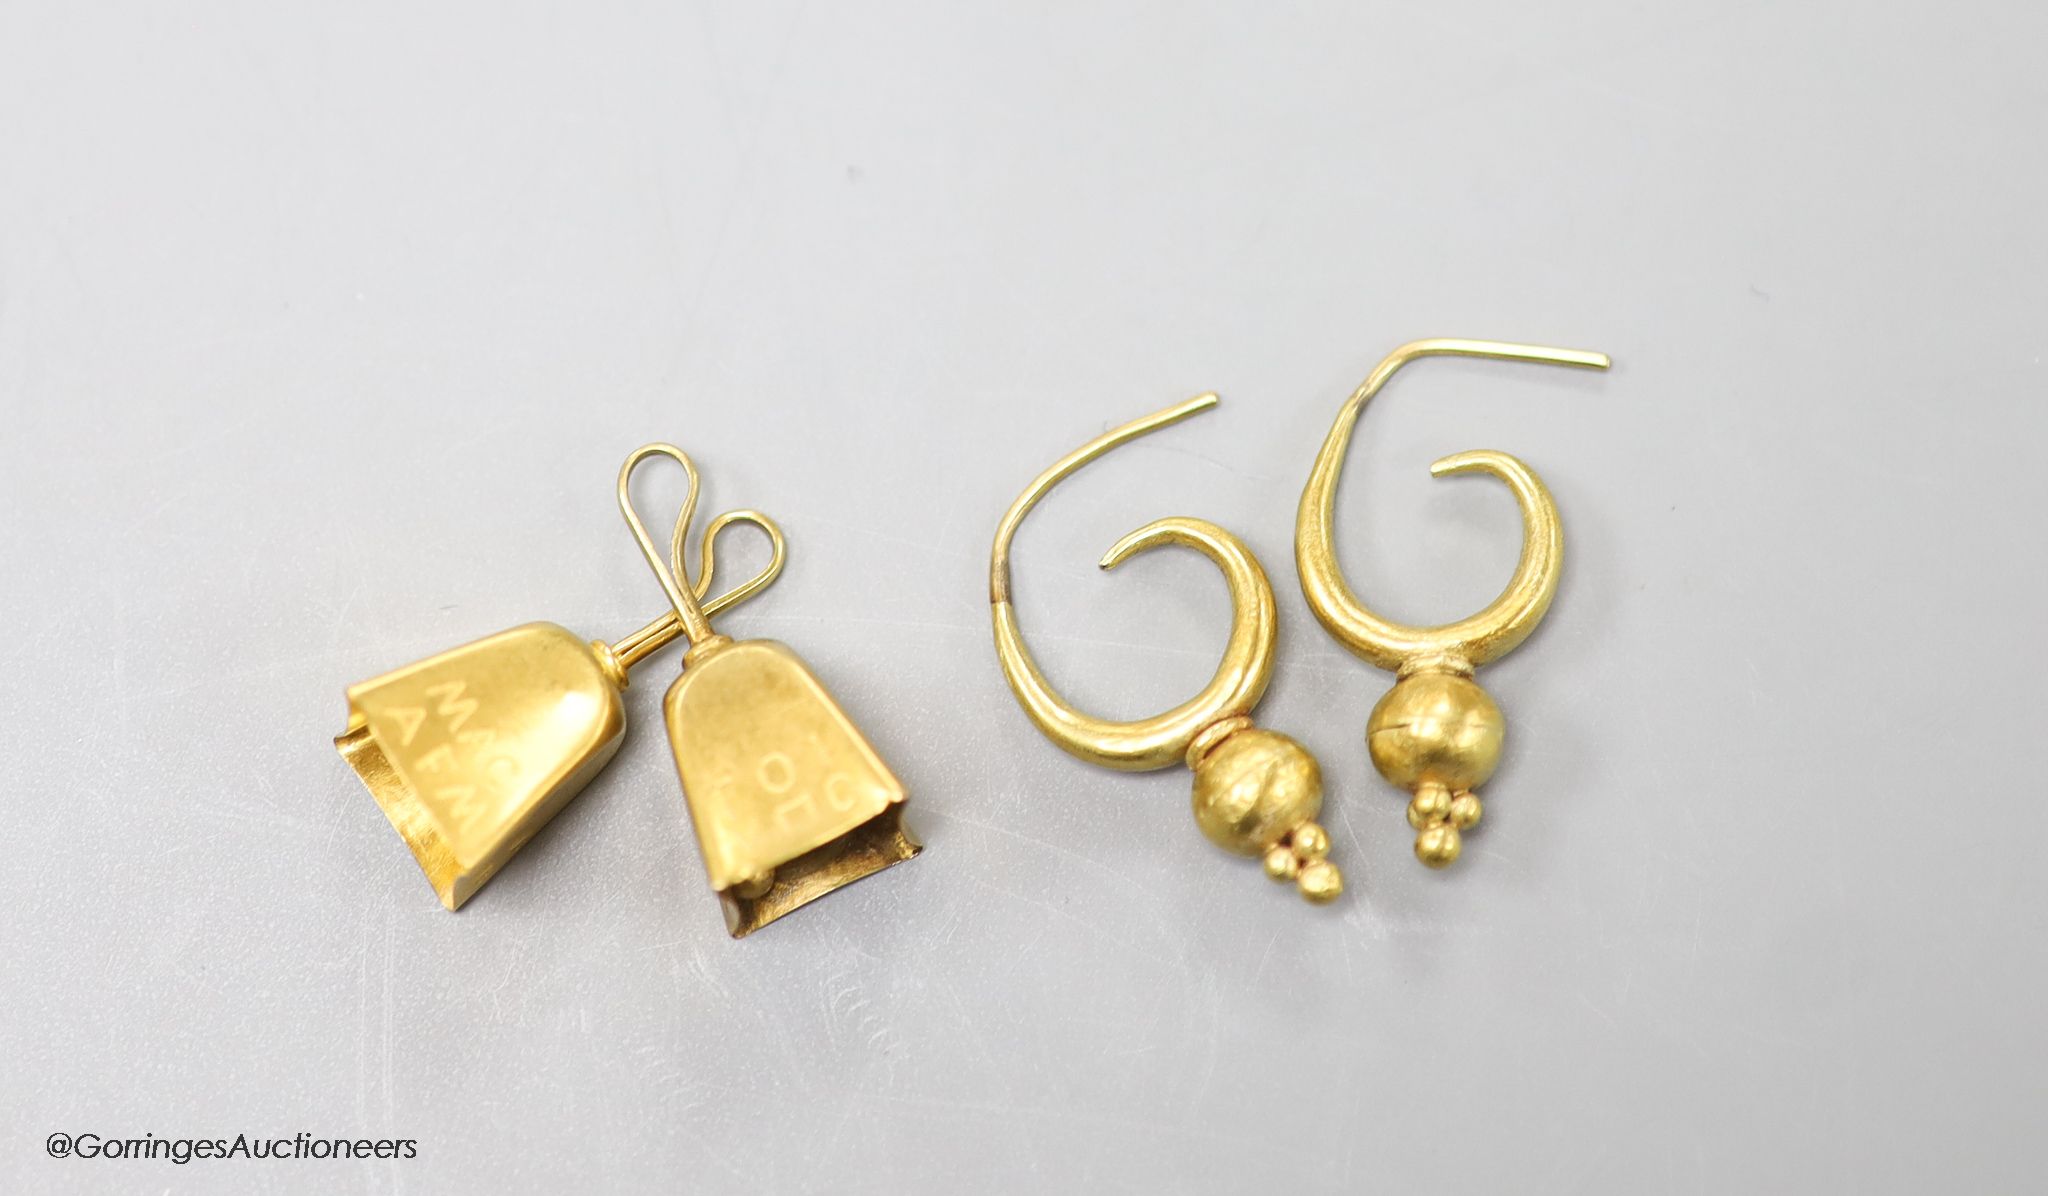 A pair of yellow metal earrings and a pair of yellow metal cowbell charms